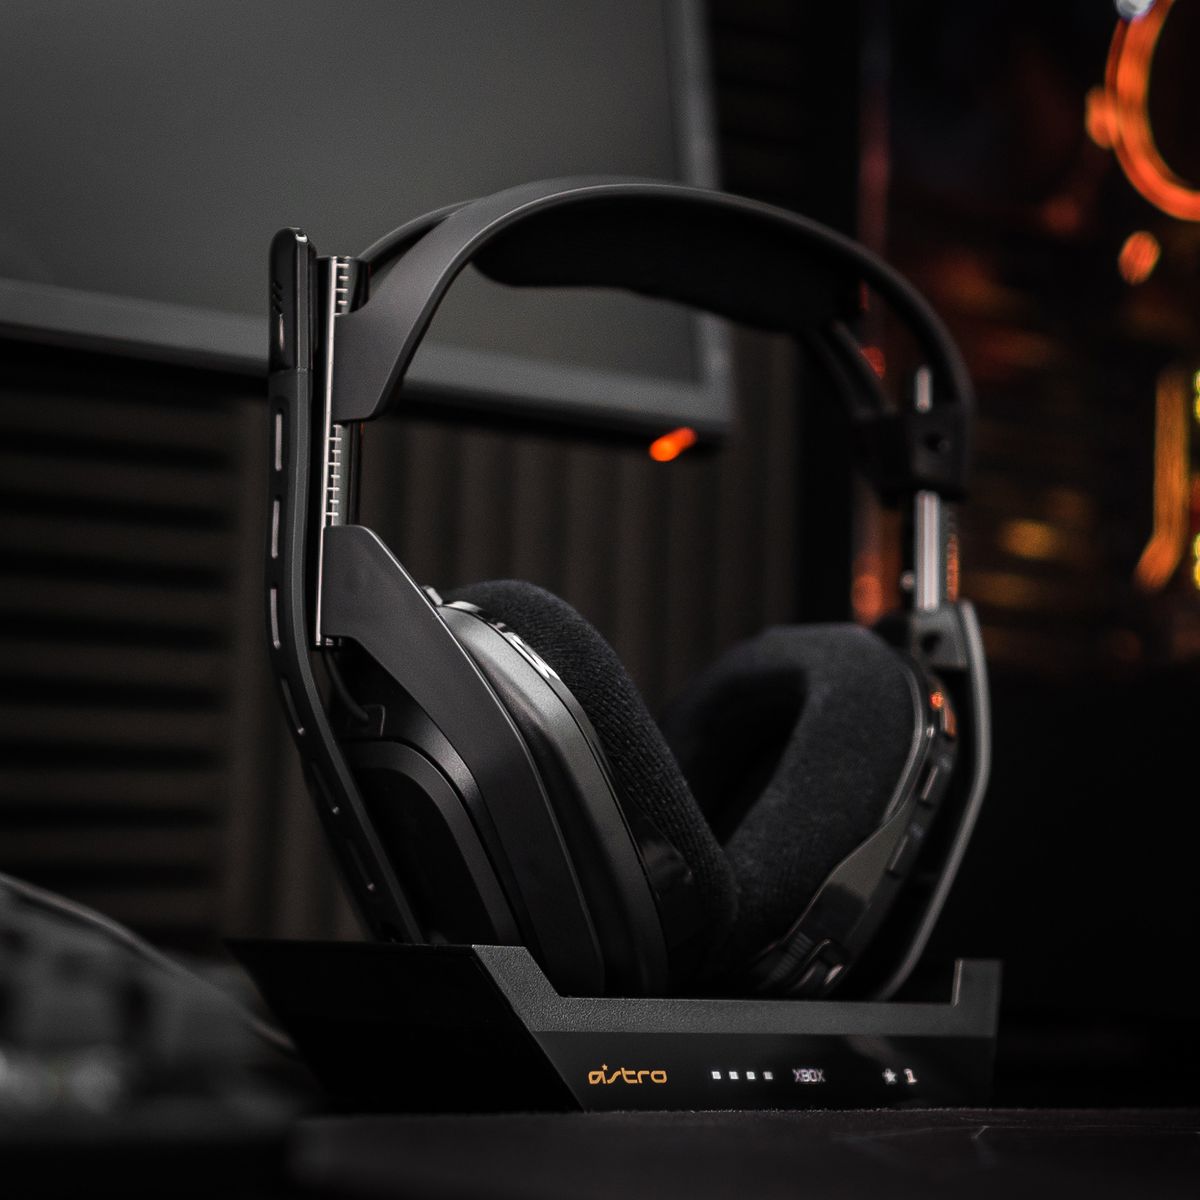 The Astro A50 for Xbox and PC shown here in its charging cradle.